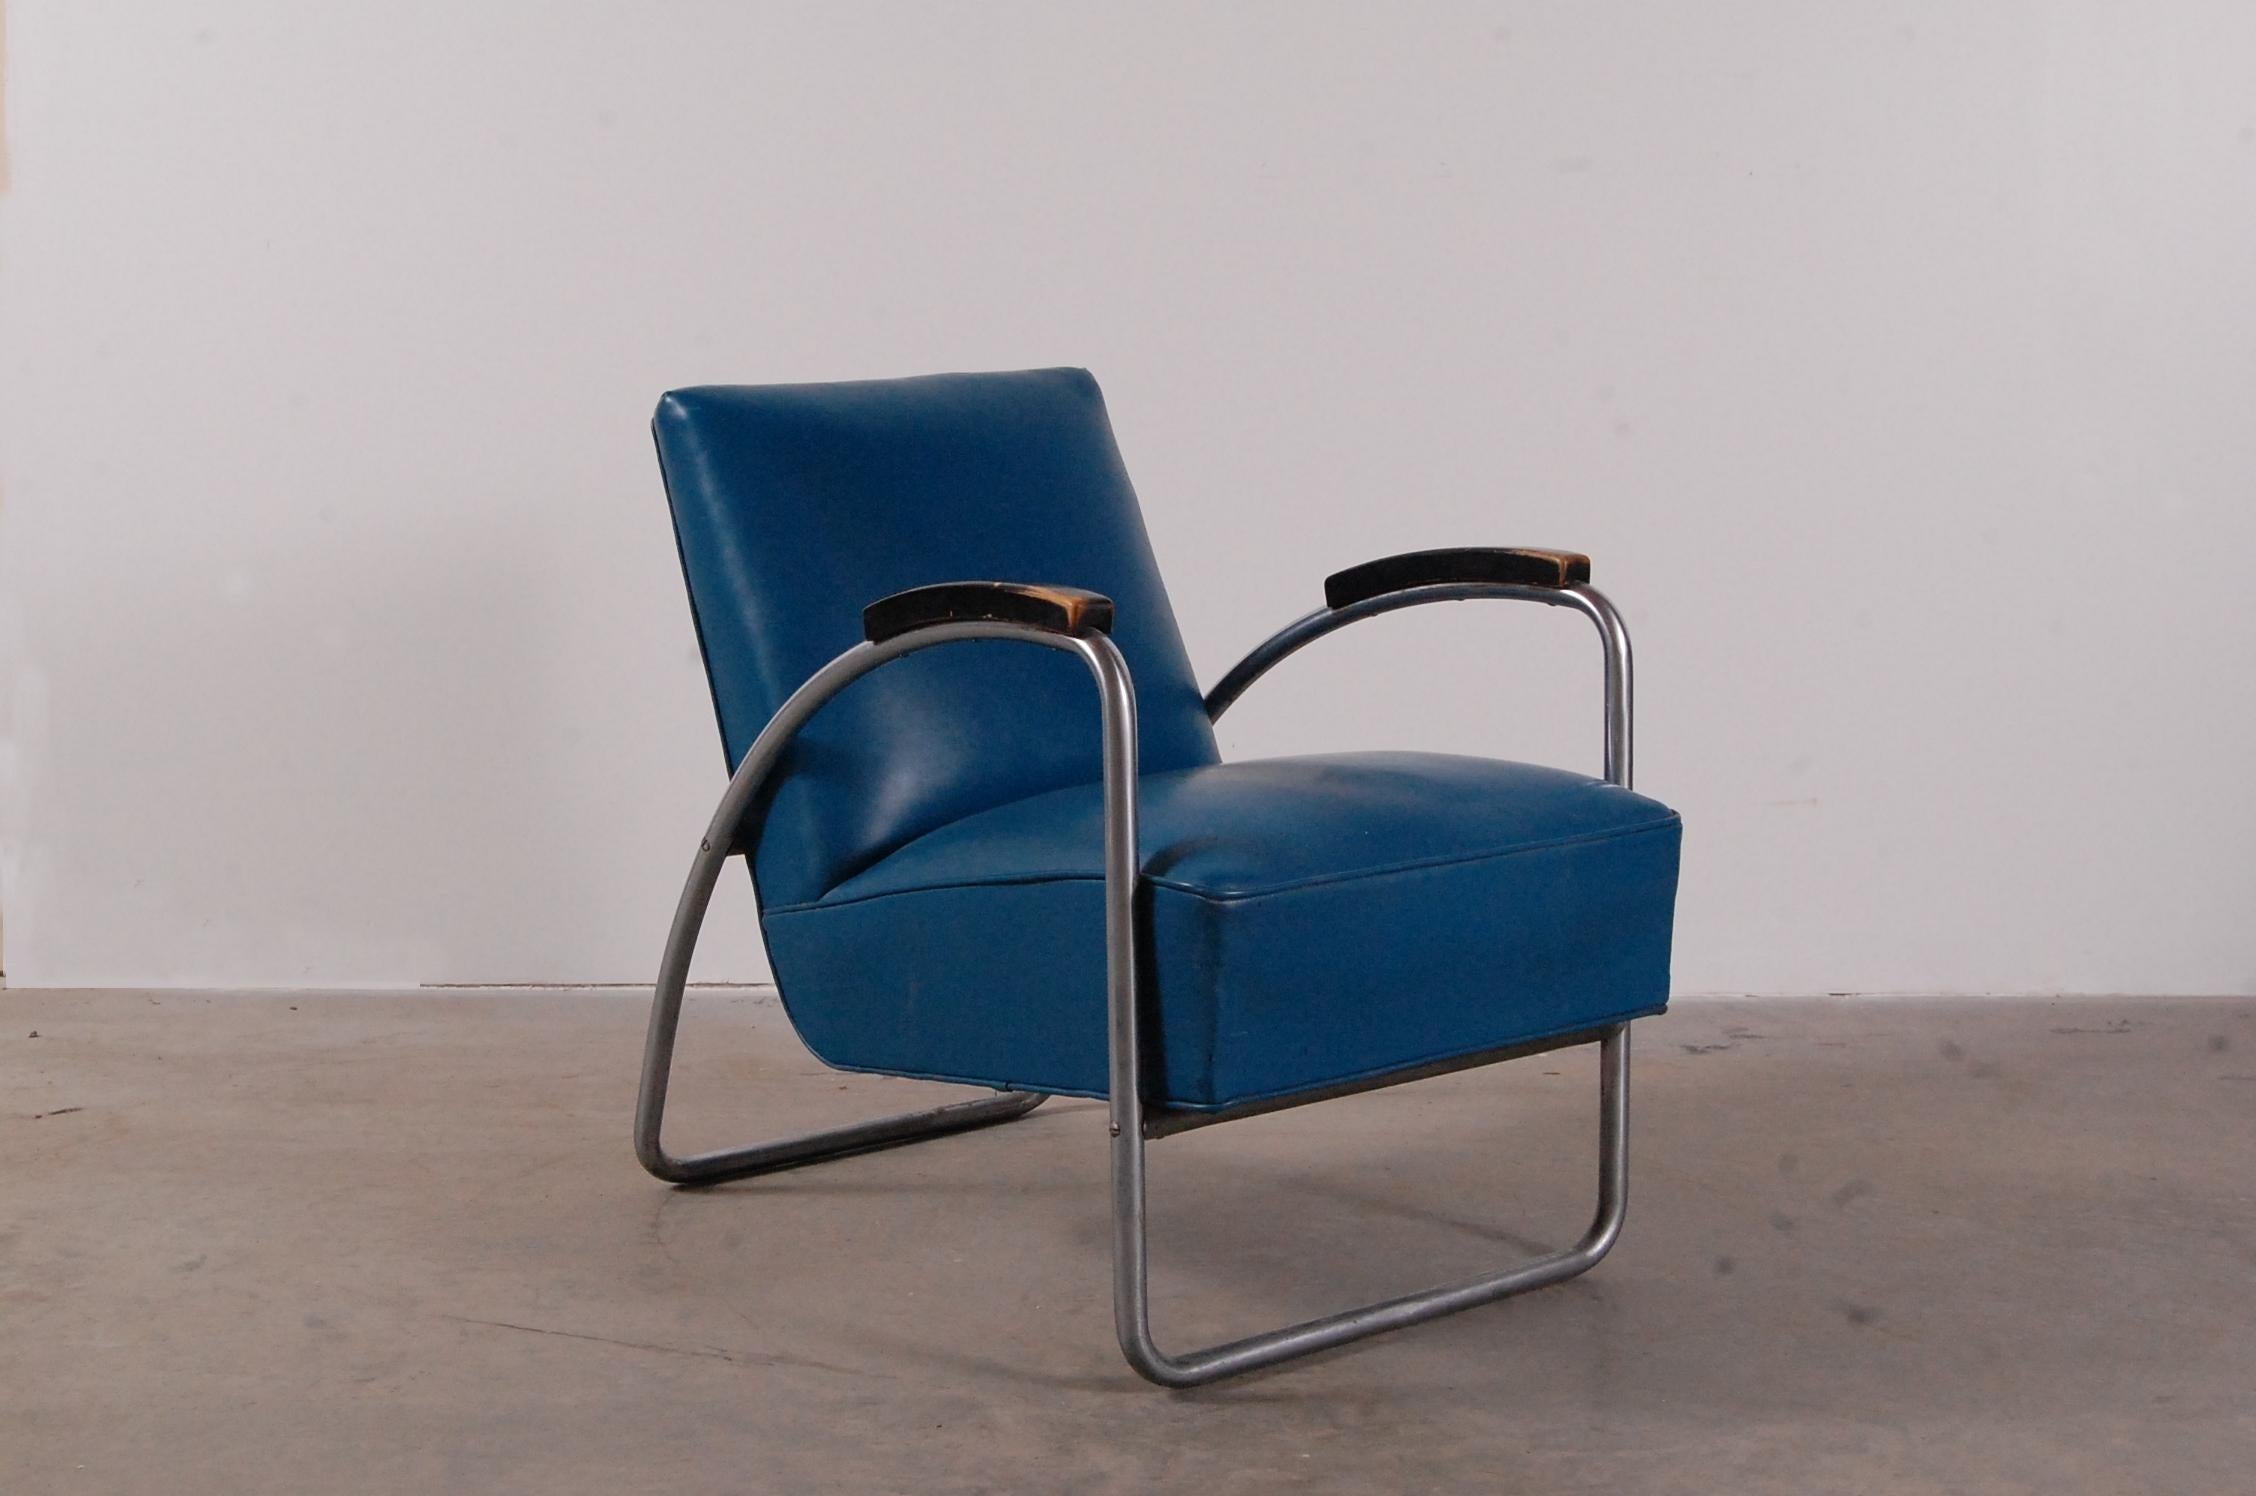 Art Deco Thonet Lounge Chair from the PSFS building in Philadelphia